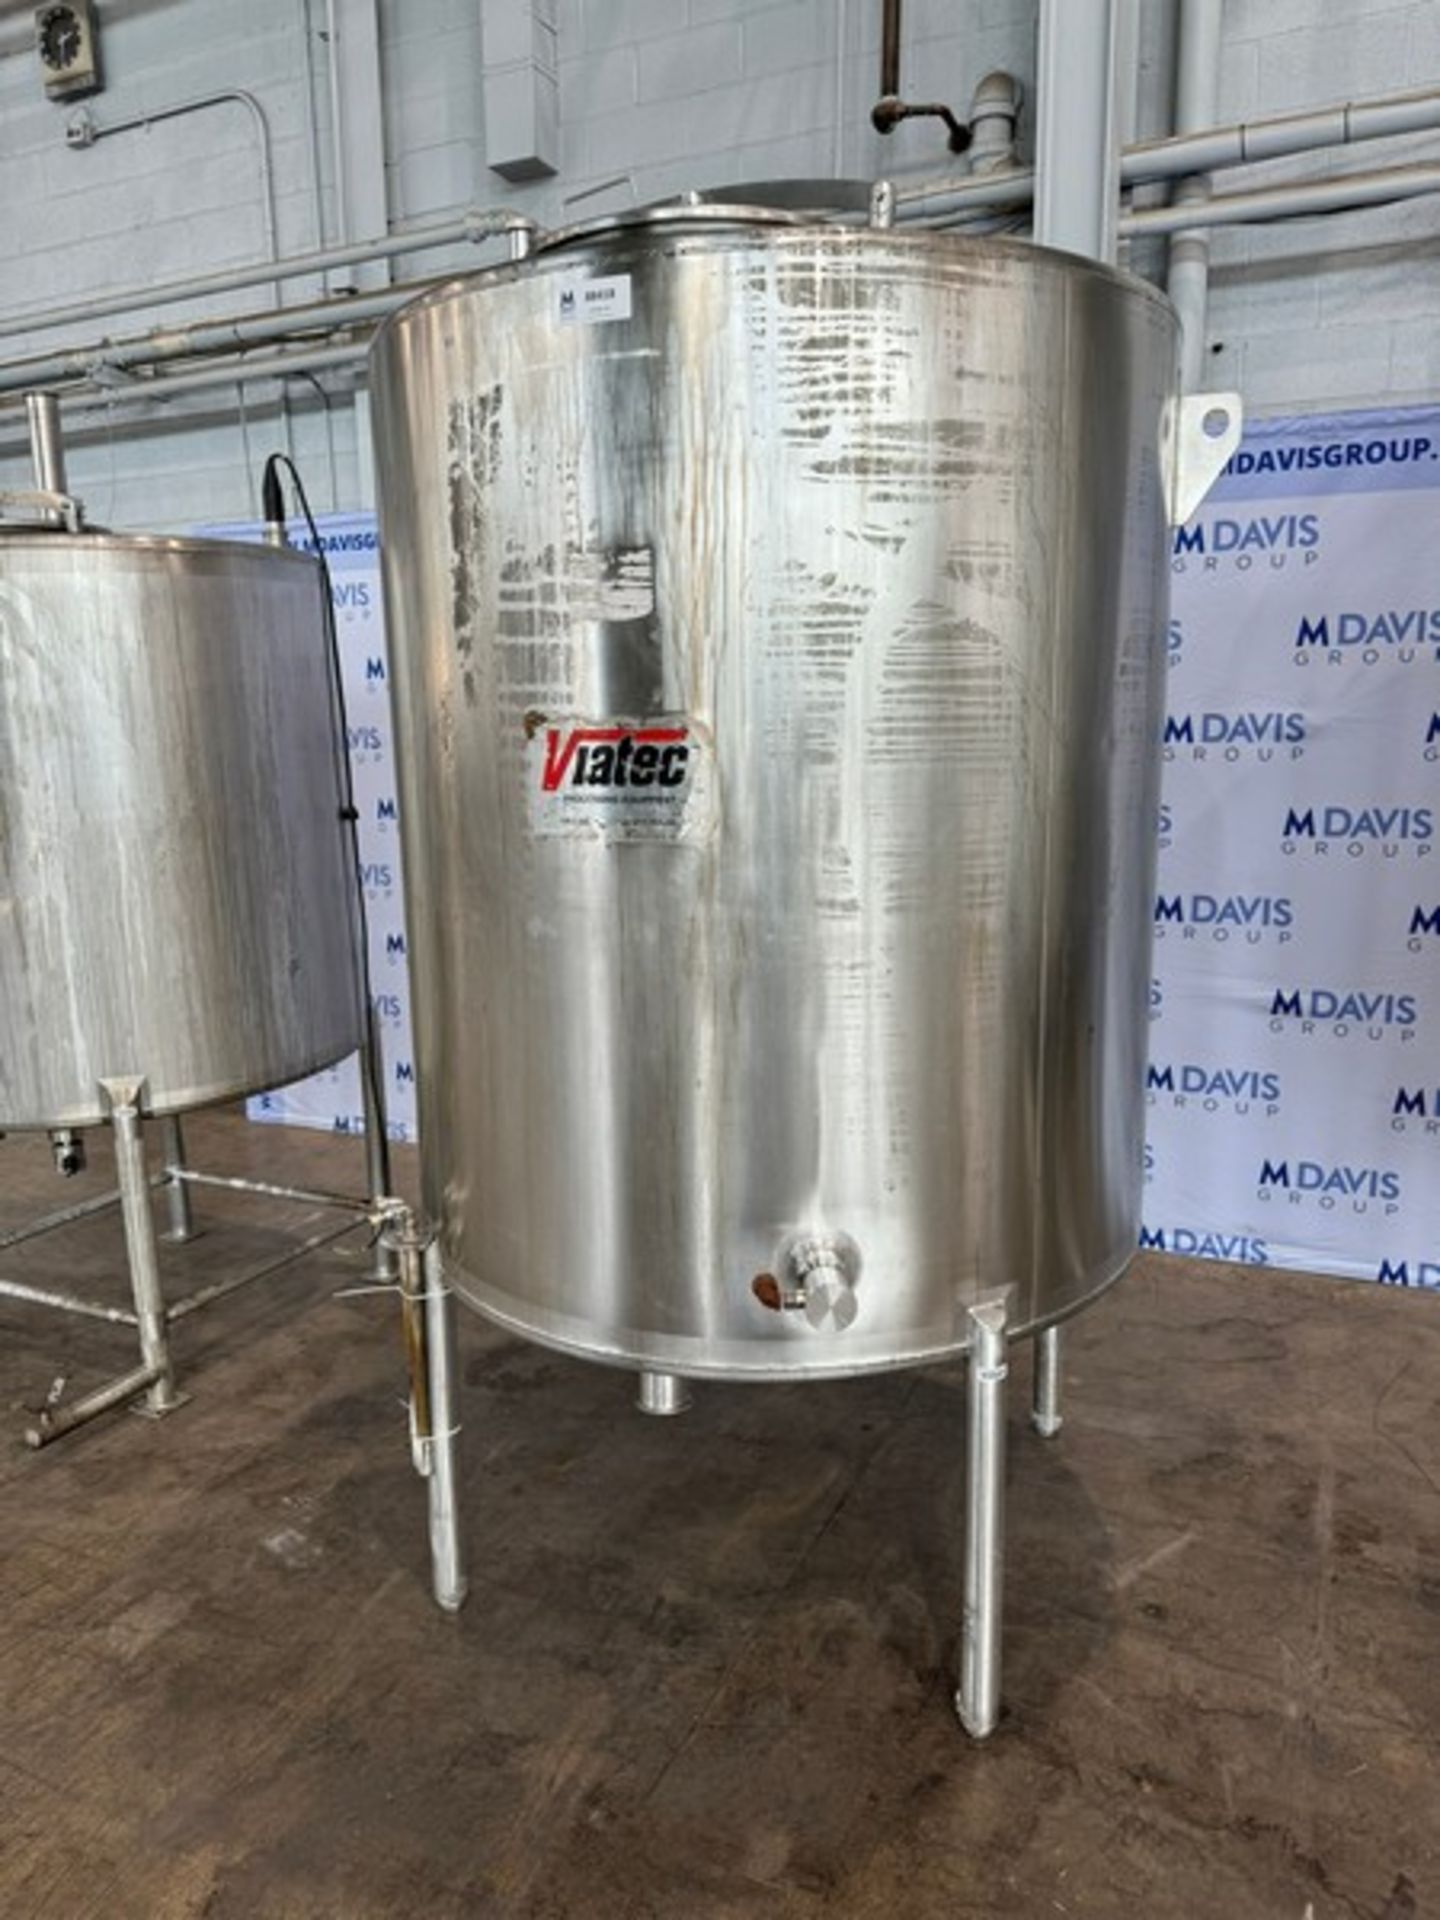 Viatec Aprox. 500 Gal. S/S Single Wall Tank, Vessel Dims.: Aprox. 57" H x 52" Dia. Mounted on S/S - Image 2 of 11